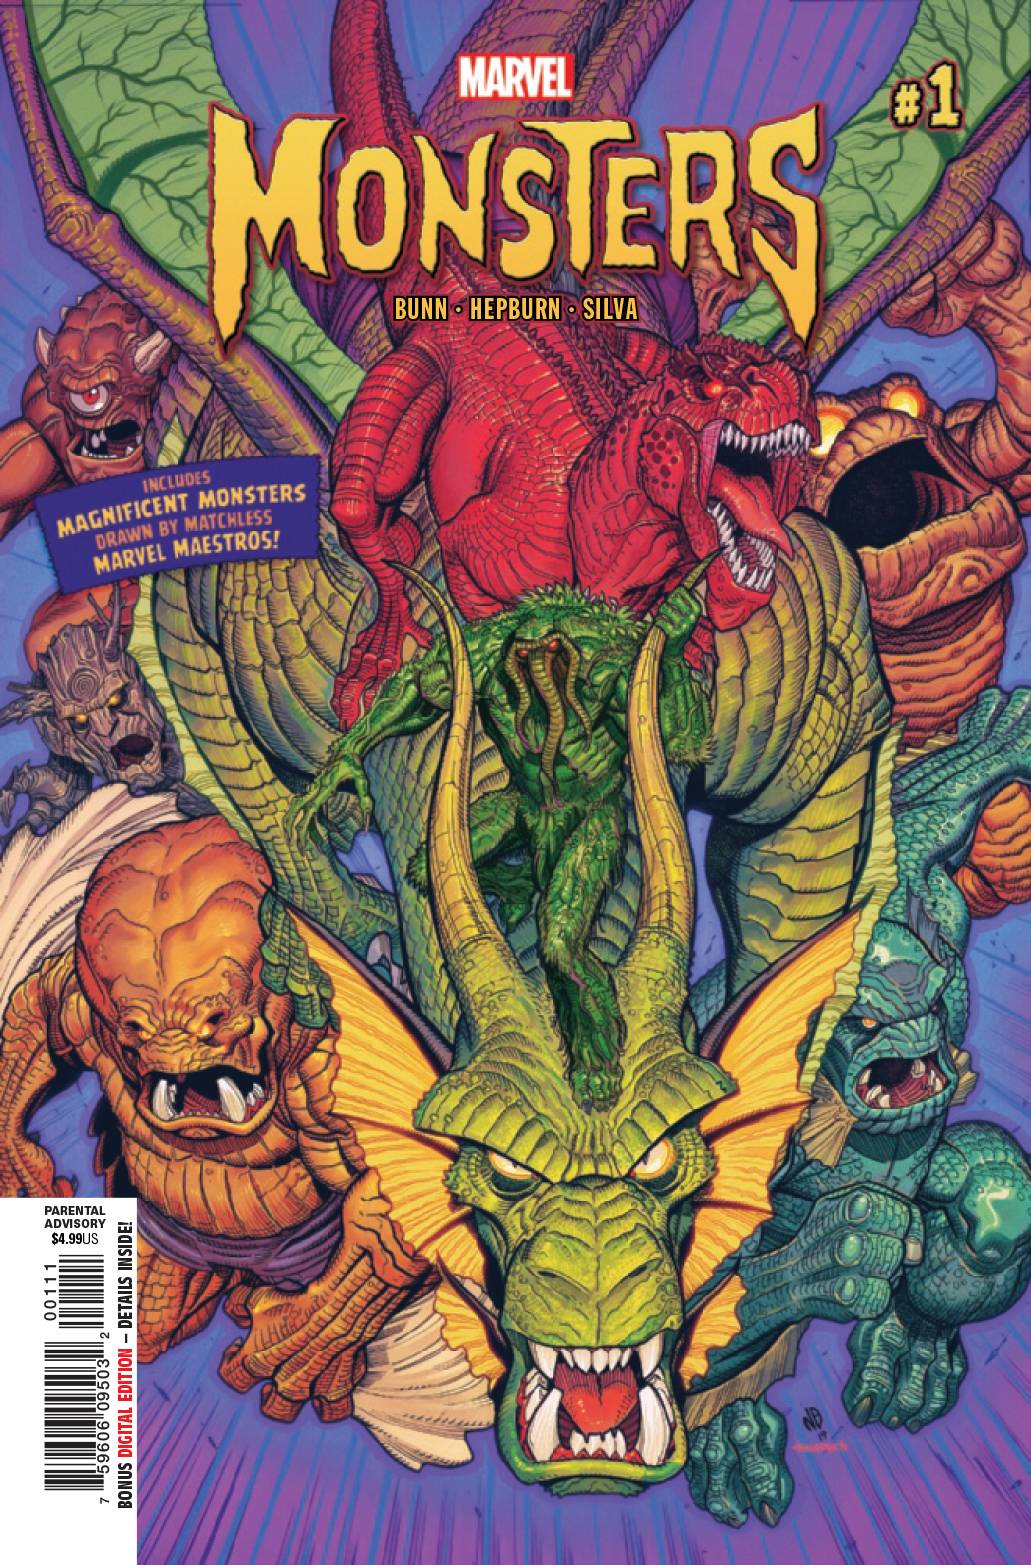 Marvel Monsters #1 - State of Comics